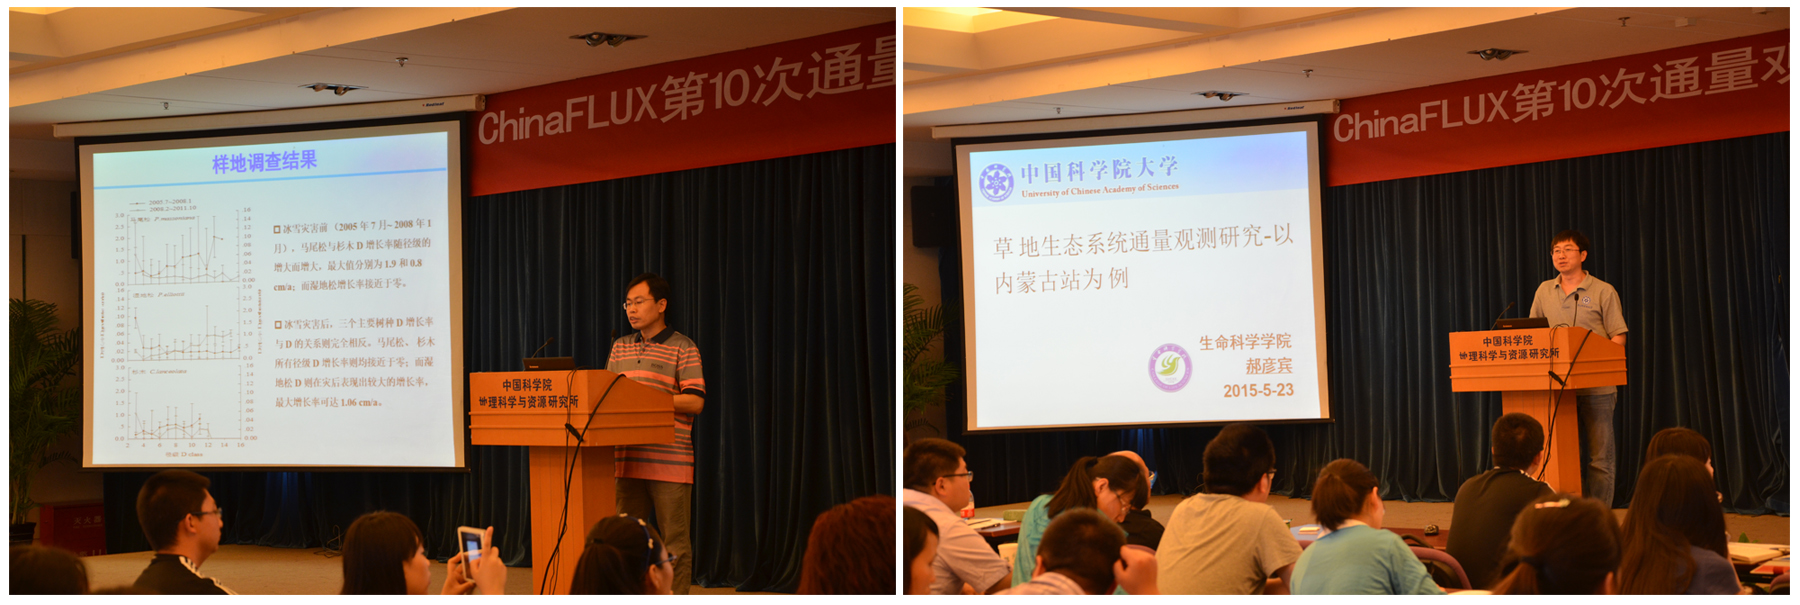 LICA attended the 10th ChinaFLUX Training Conference on Flux observation Theory and Technology